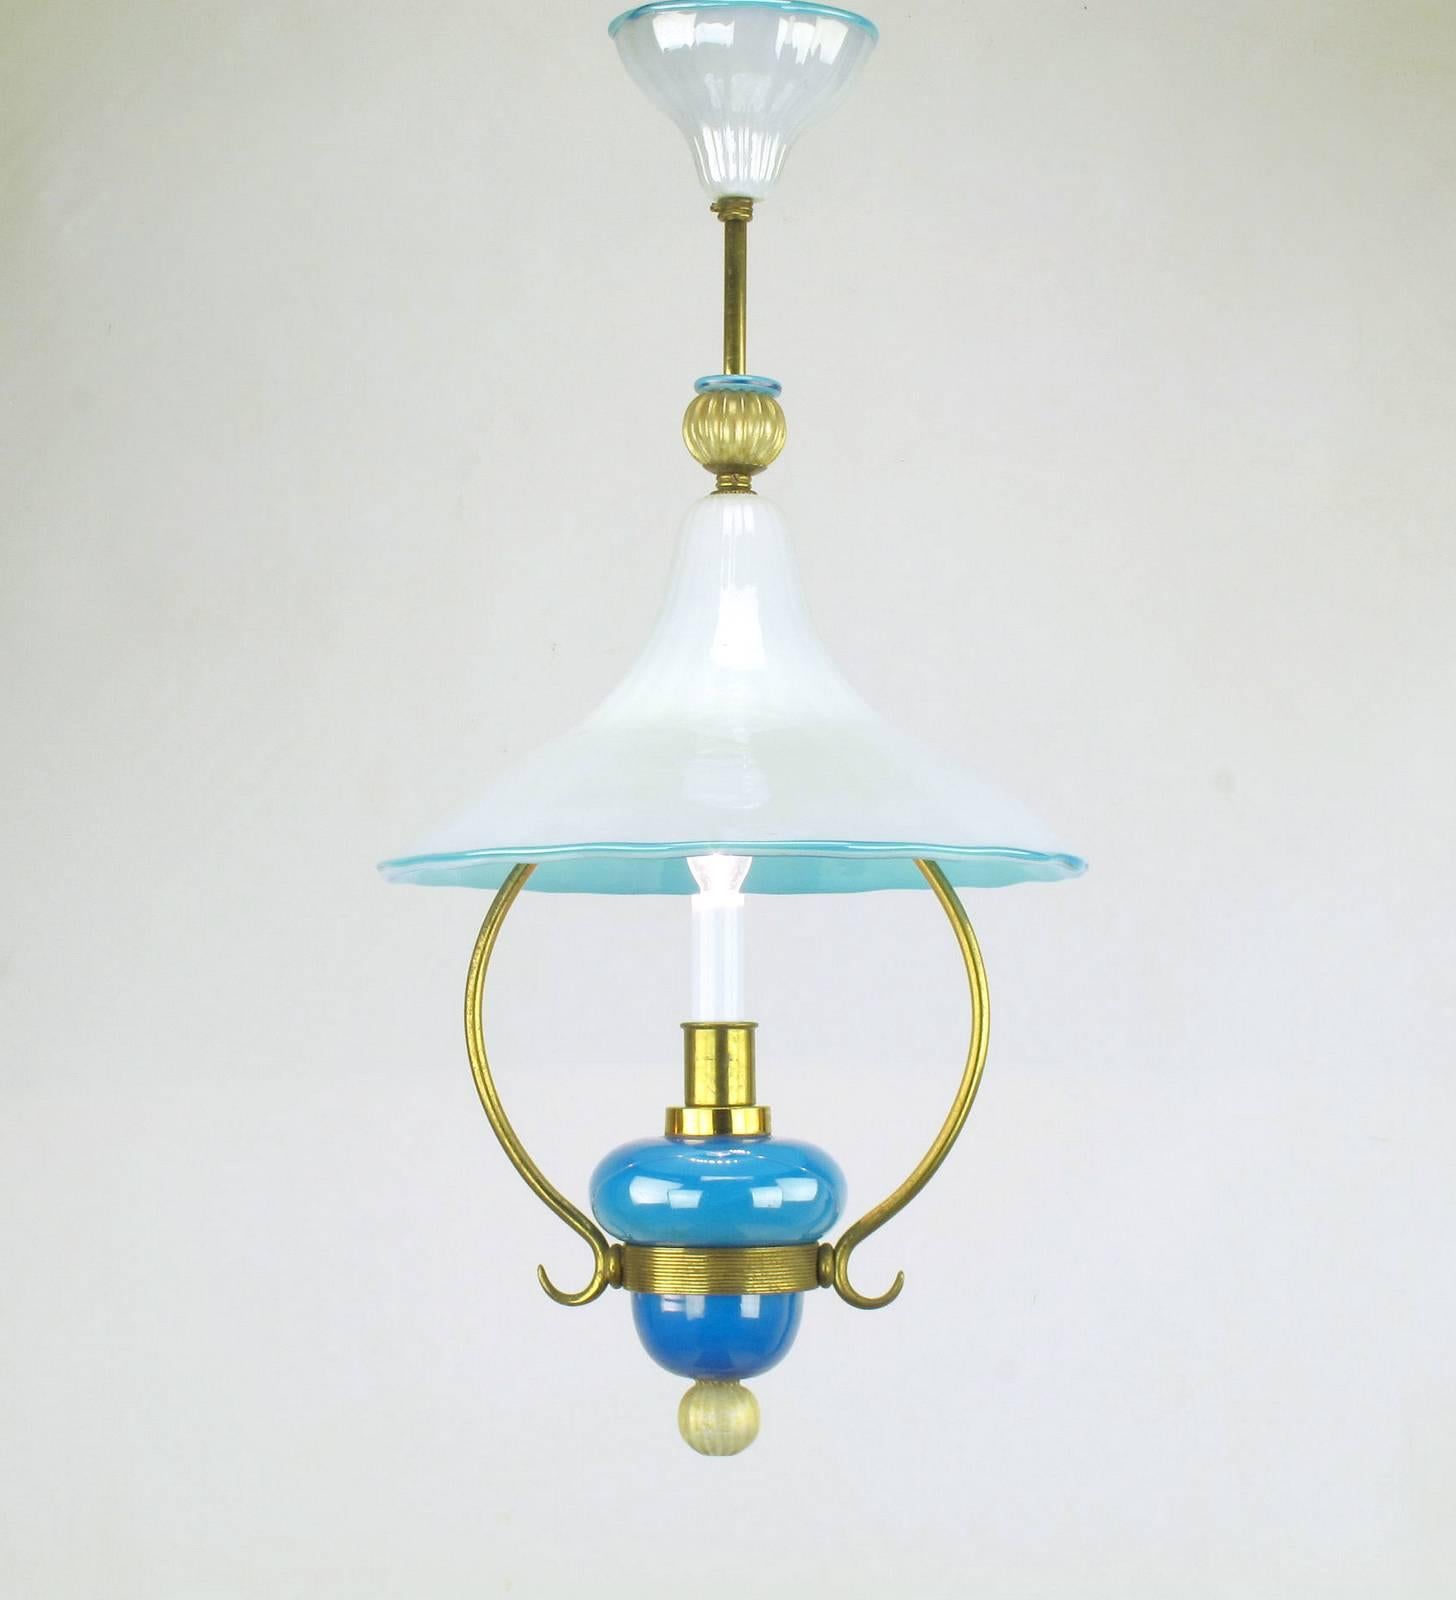 Exceptional handblown Italian Murano cased glass pendant light with brass frame. Blue and white cased glass canopy, hooded shade and body with gold flecked finals to the top and bottom. Made to look like a vintage kerosene light, this has been wired